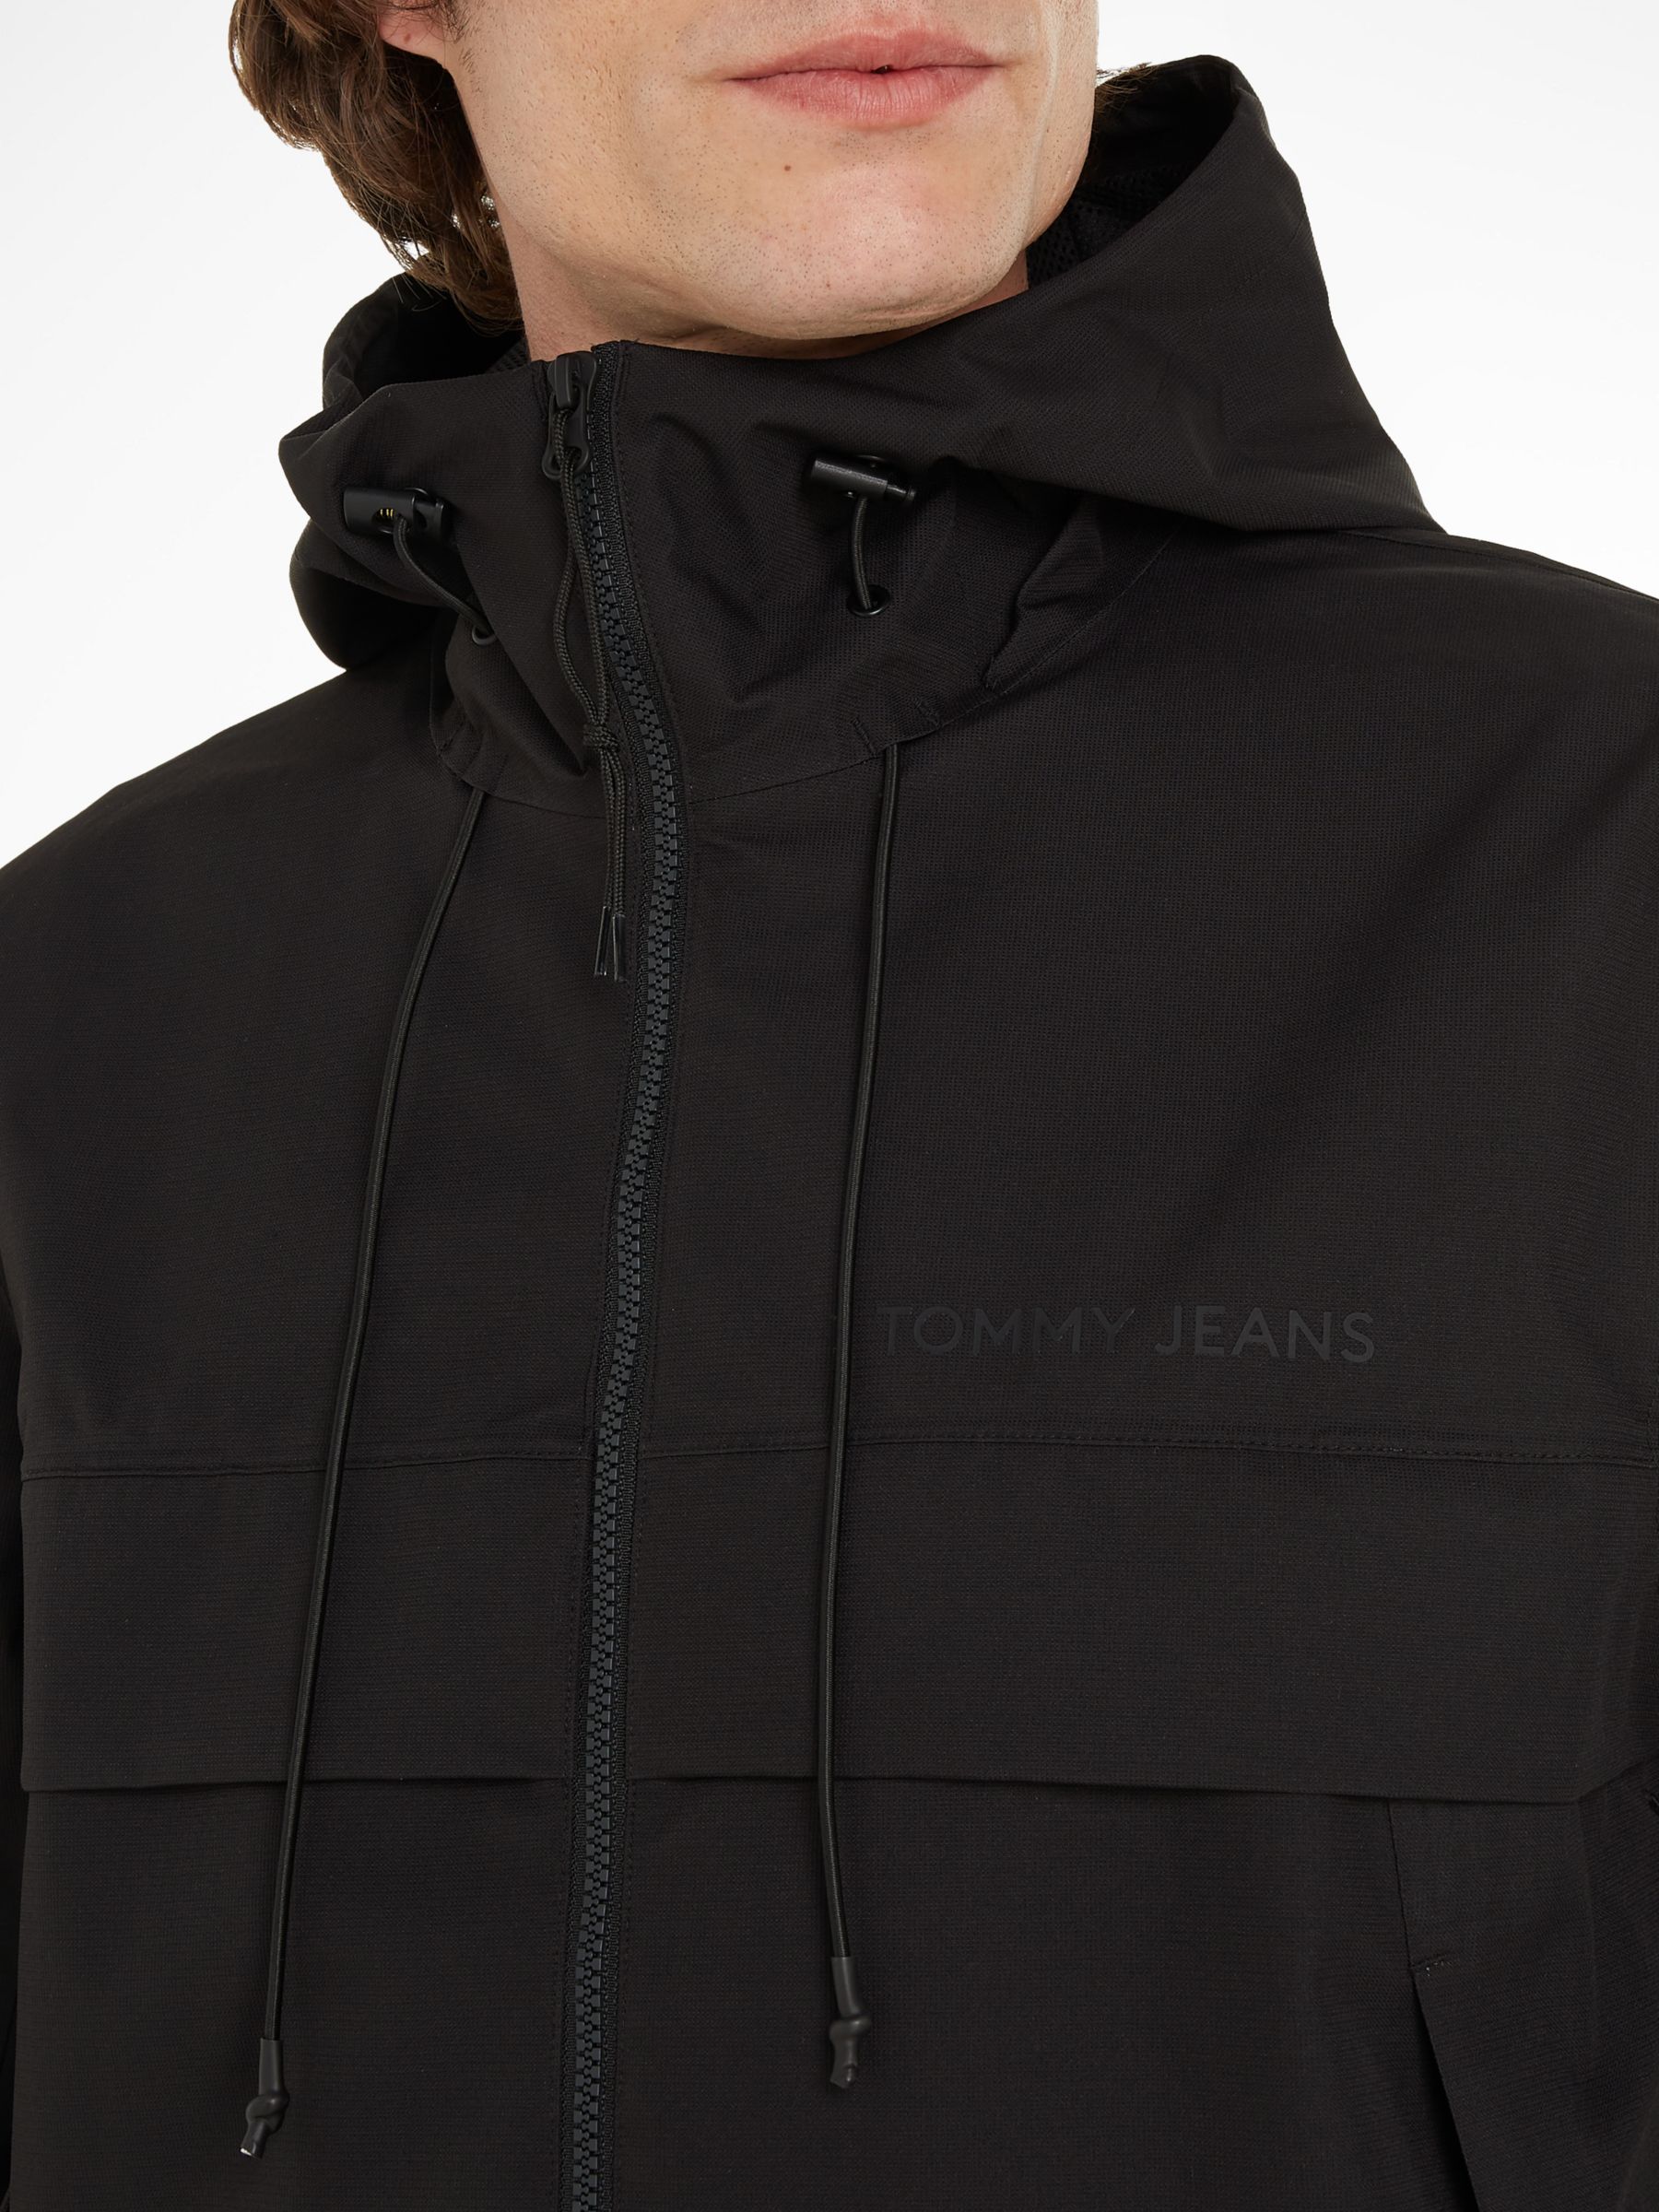 Tommy Jeans Tech Outdoor Chicago Jacket, Black, XS